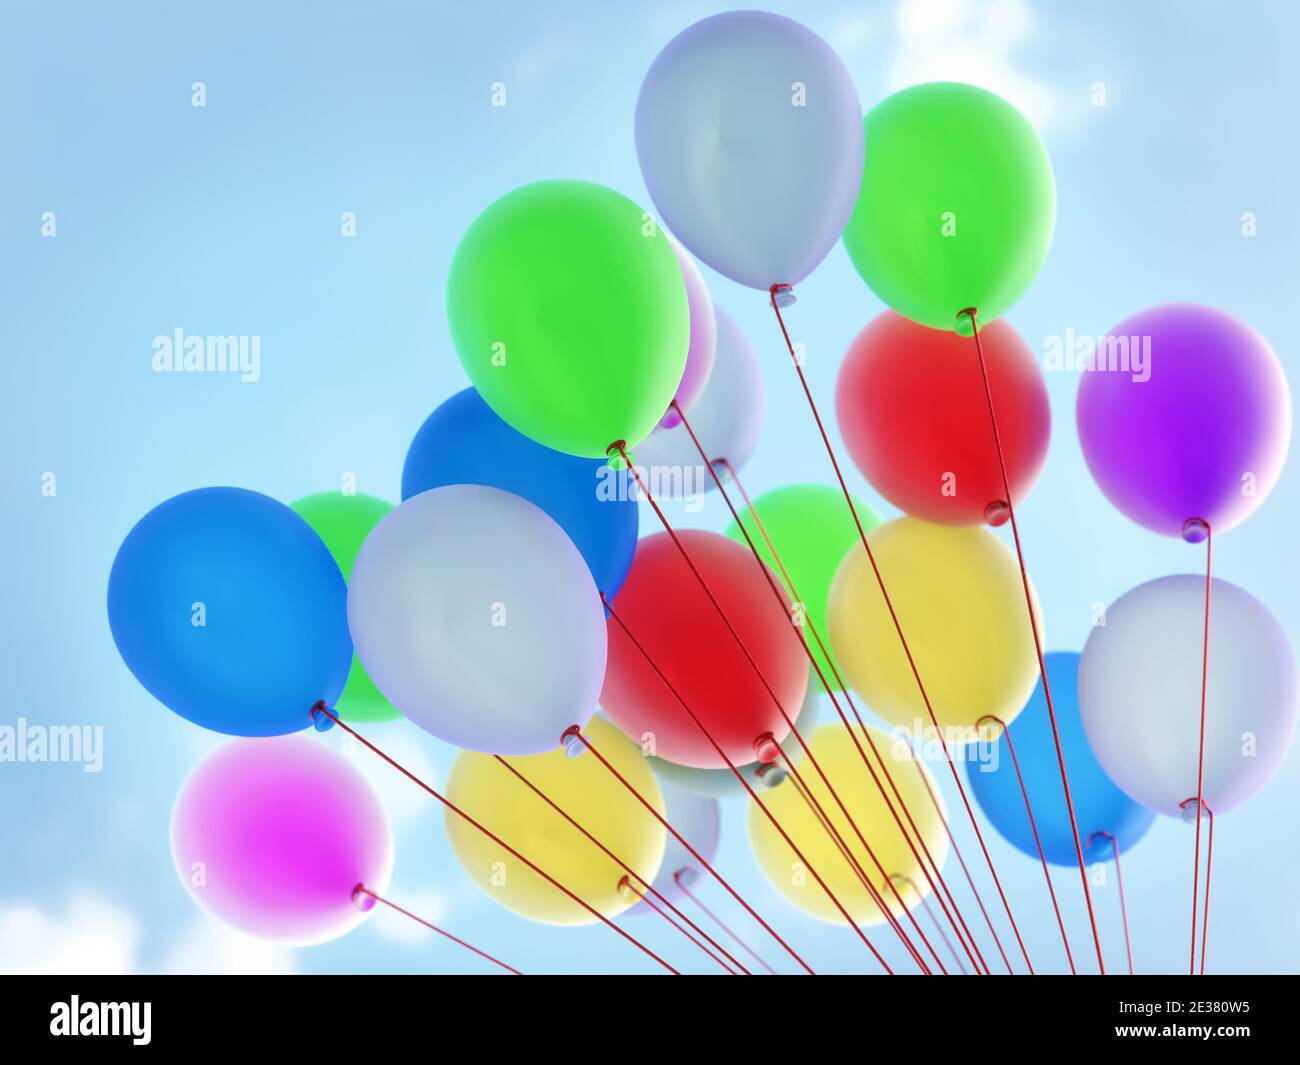 Colorful balloons rising up in the air Stock Photo